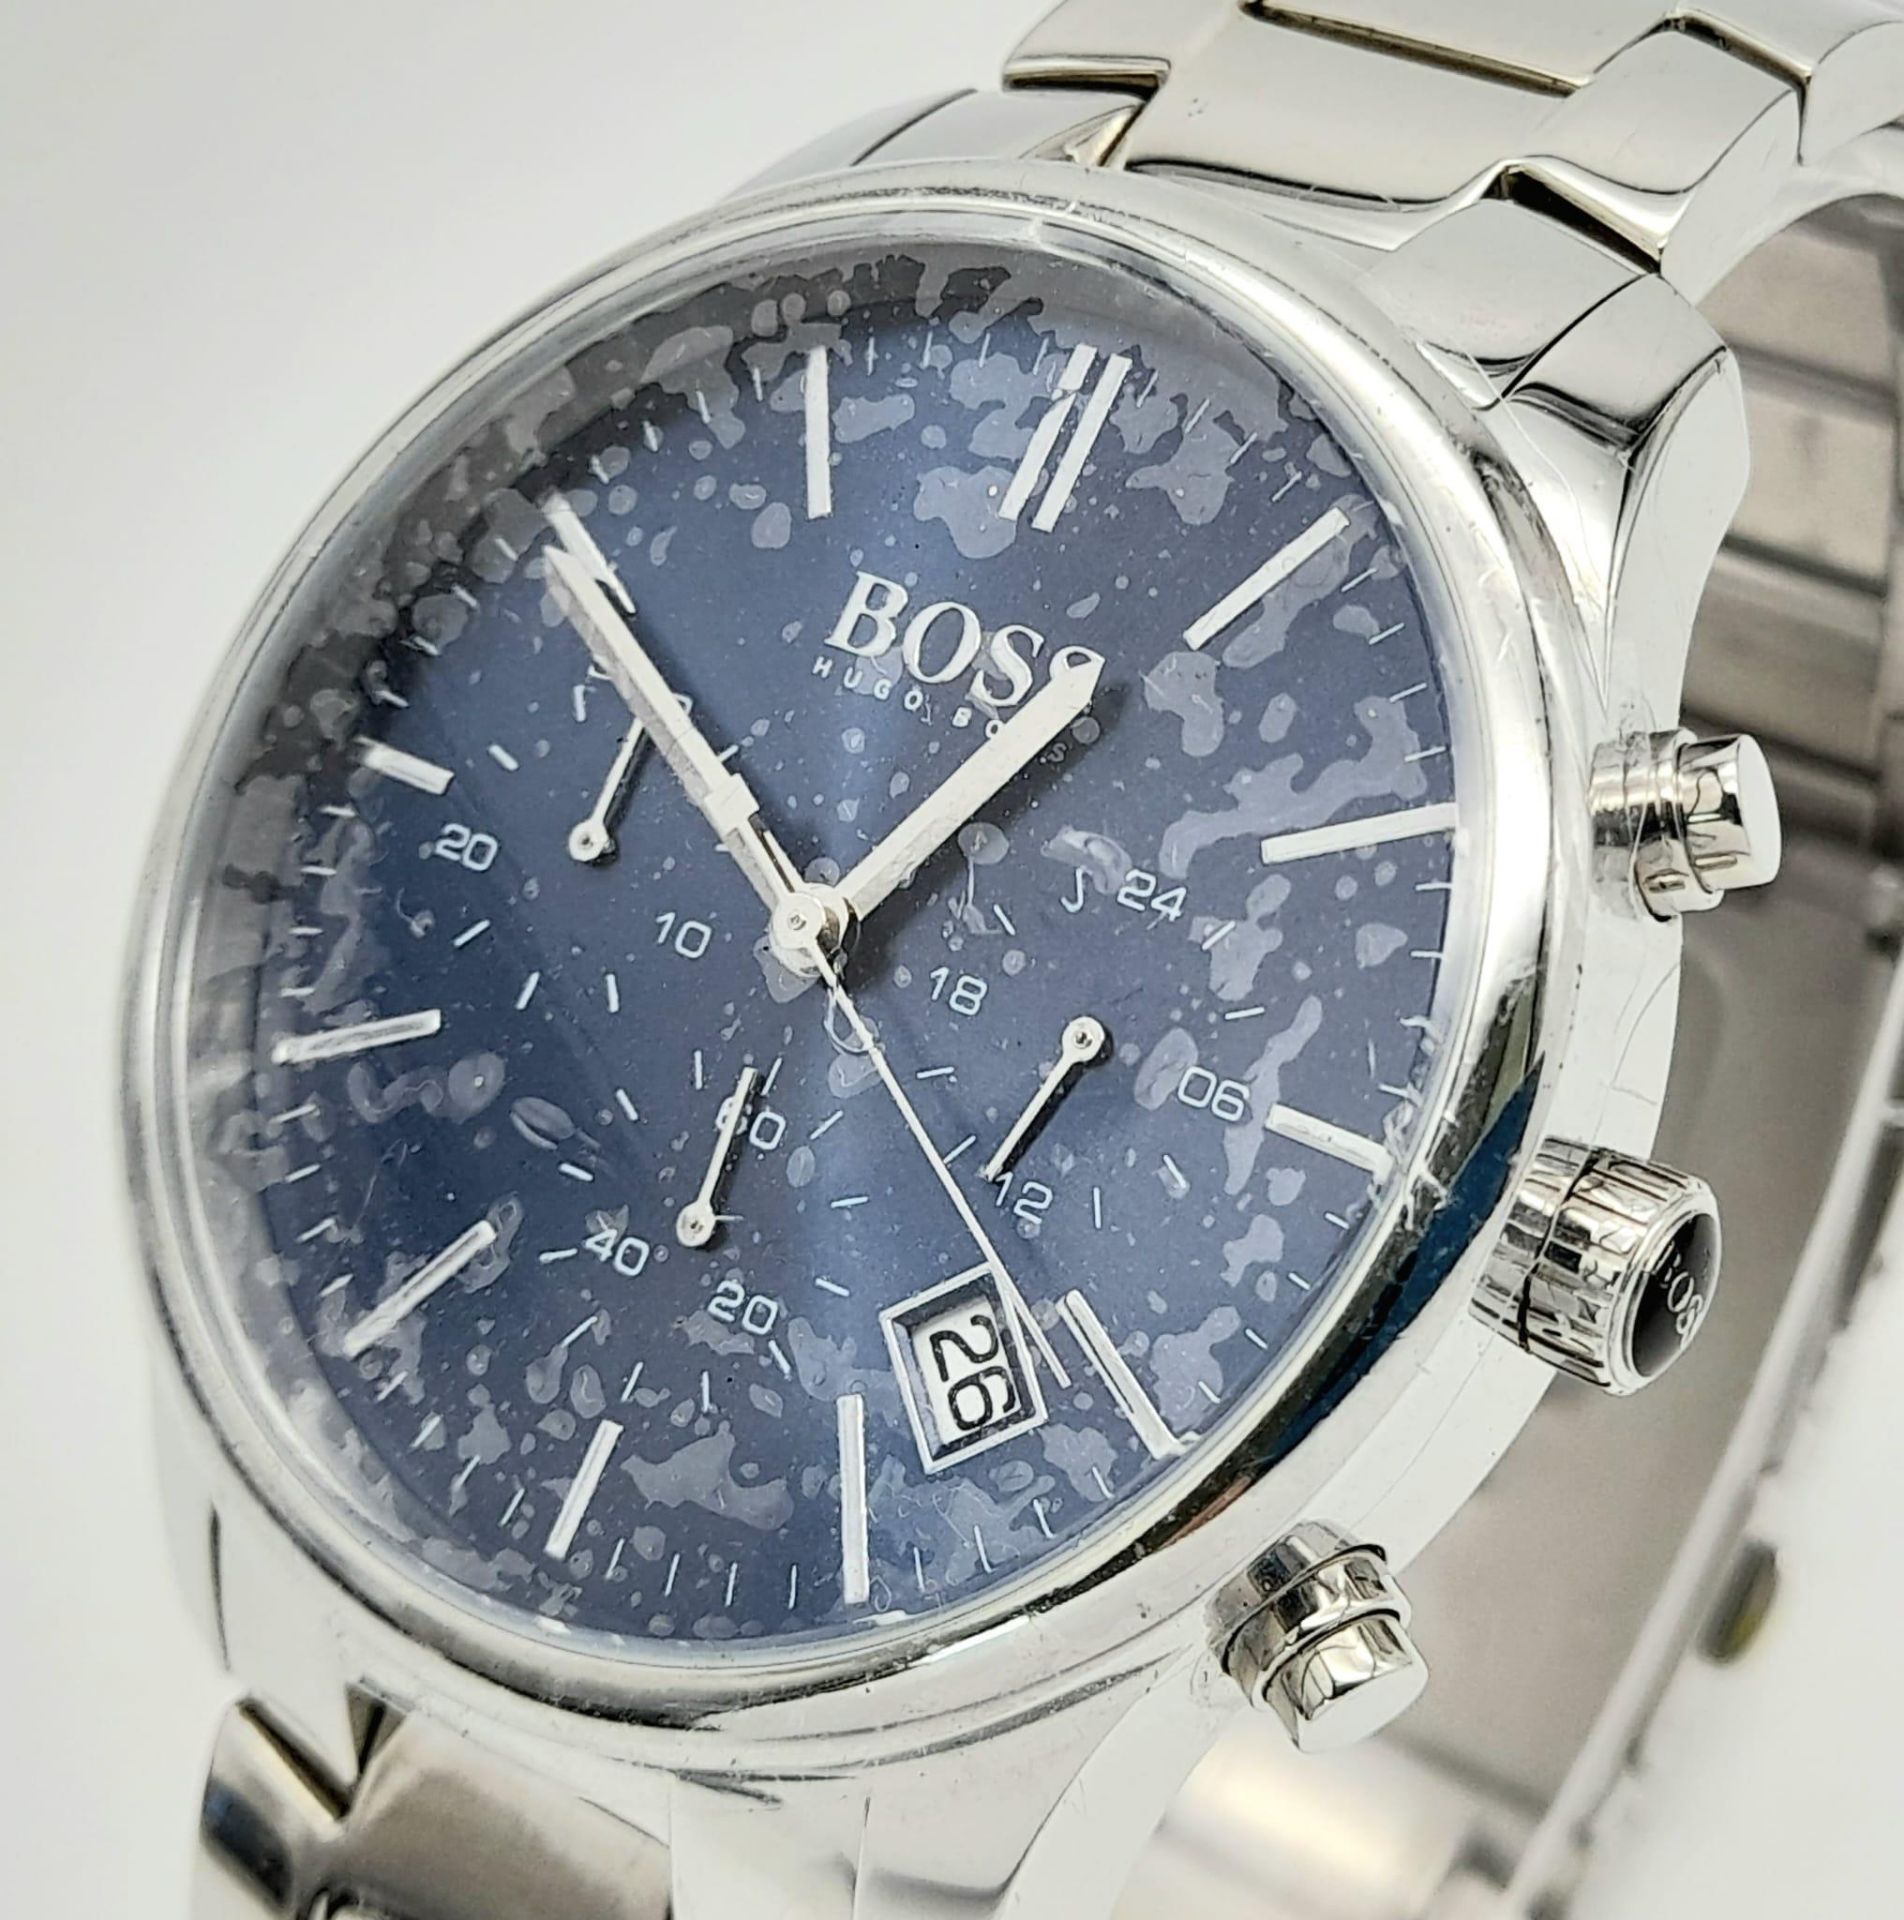 A HUGO BOSS CHRONOGRAPH WITH 3 SUBDIALS , QUARTZ MOVEMENT , STUNNING BLUE DIAL . 42mm - Image 2 of 14